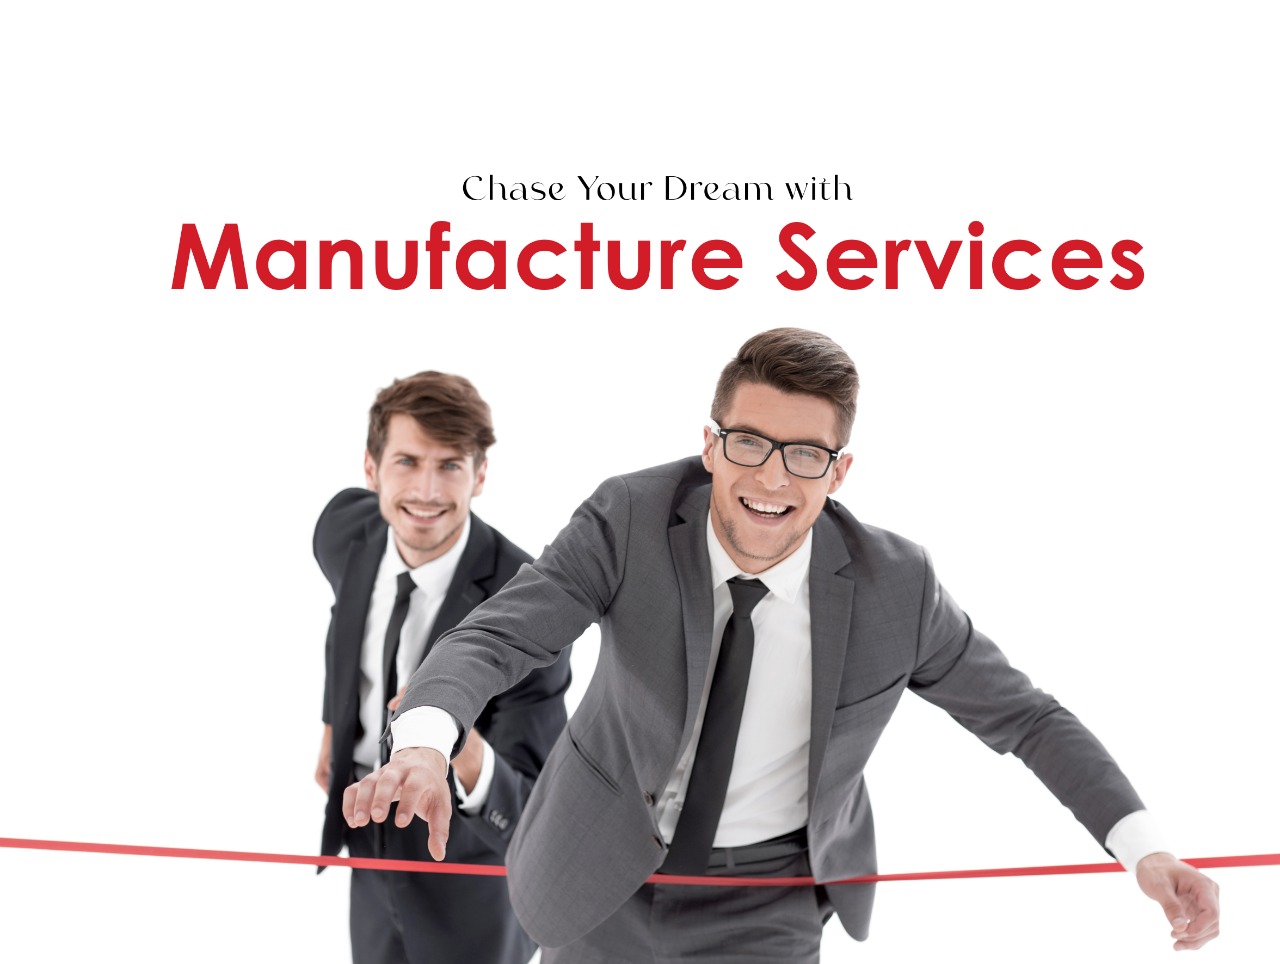 business opportunity with manufacturing services